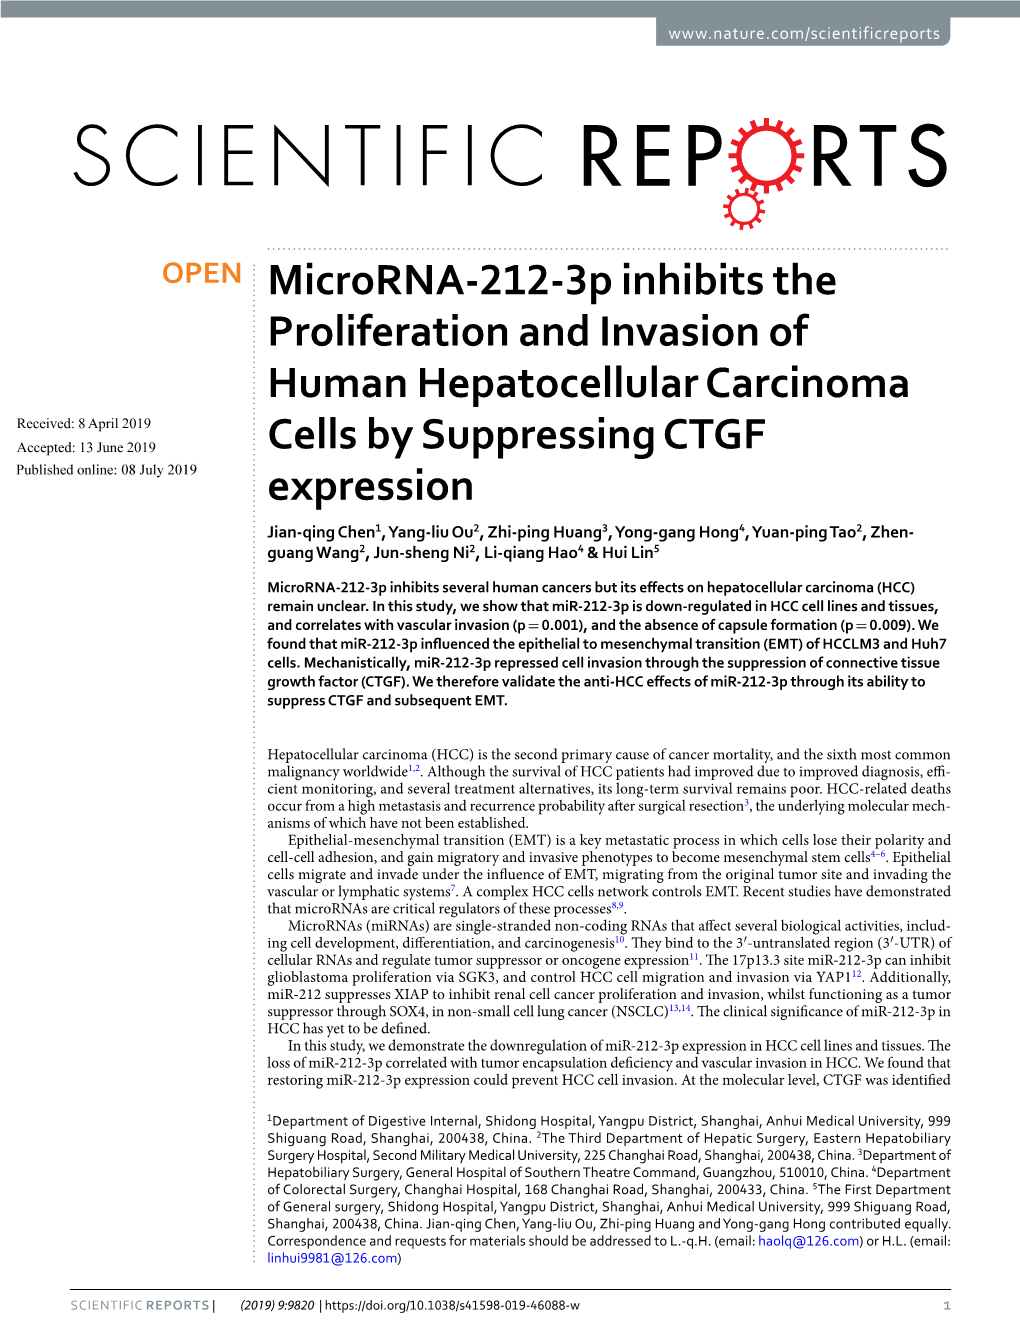 Microrna-212-3P Inhibits the Proliferation and Invasion of Human